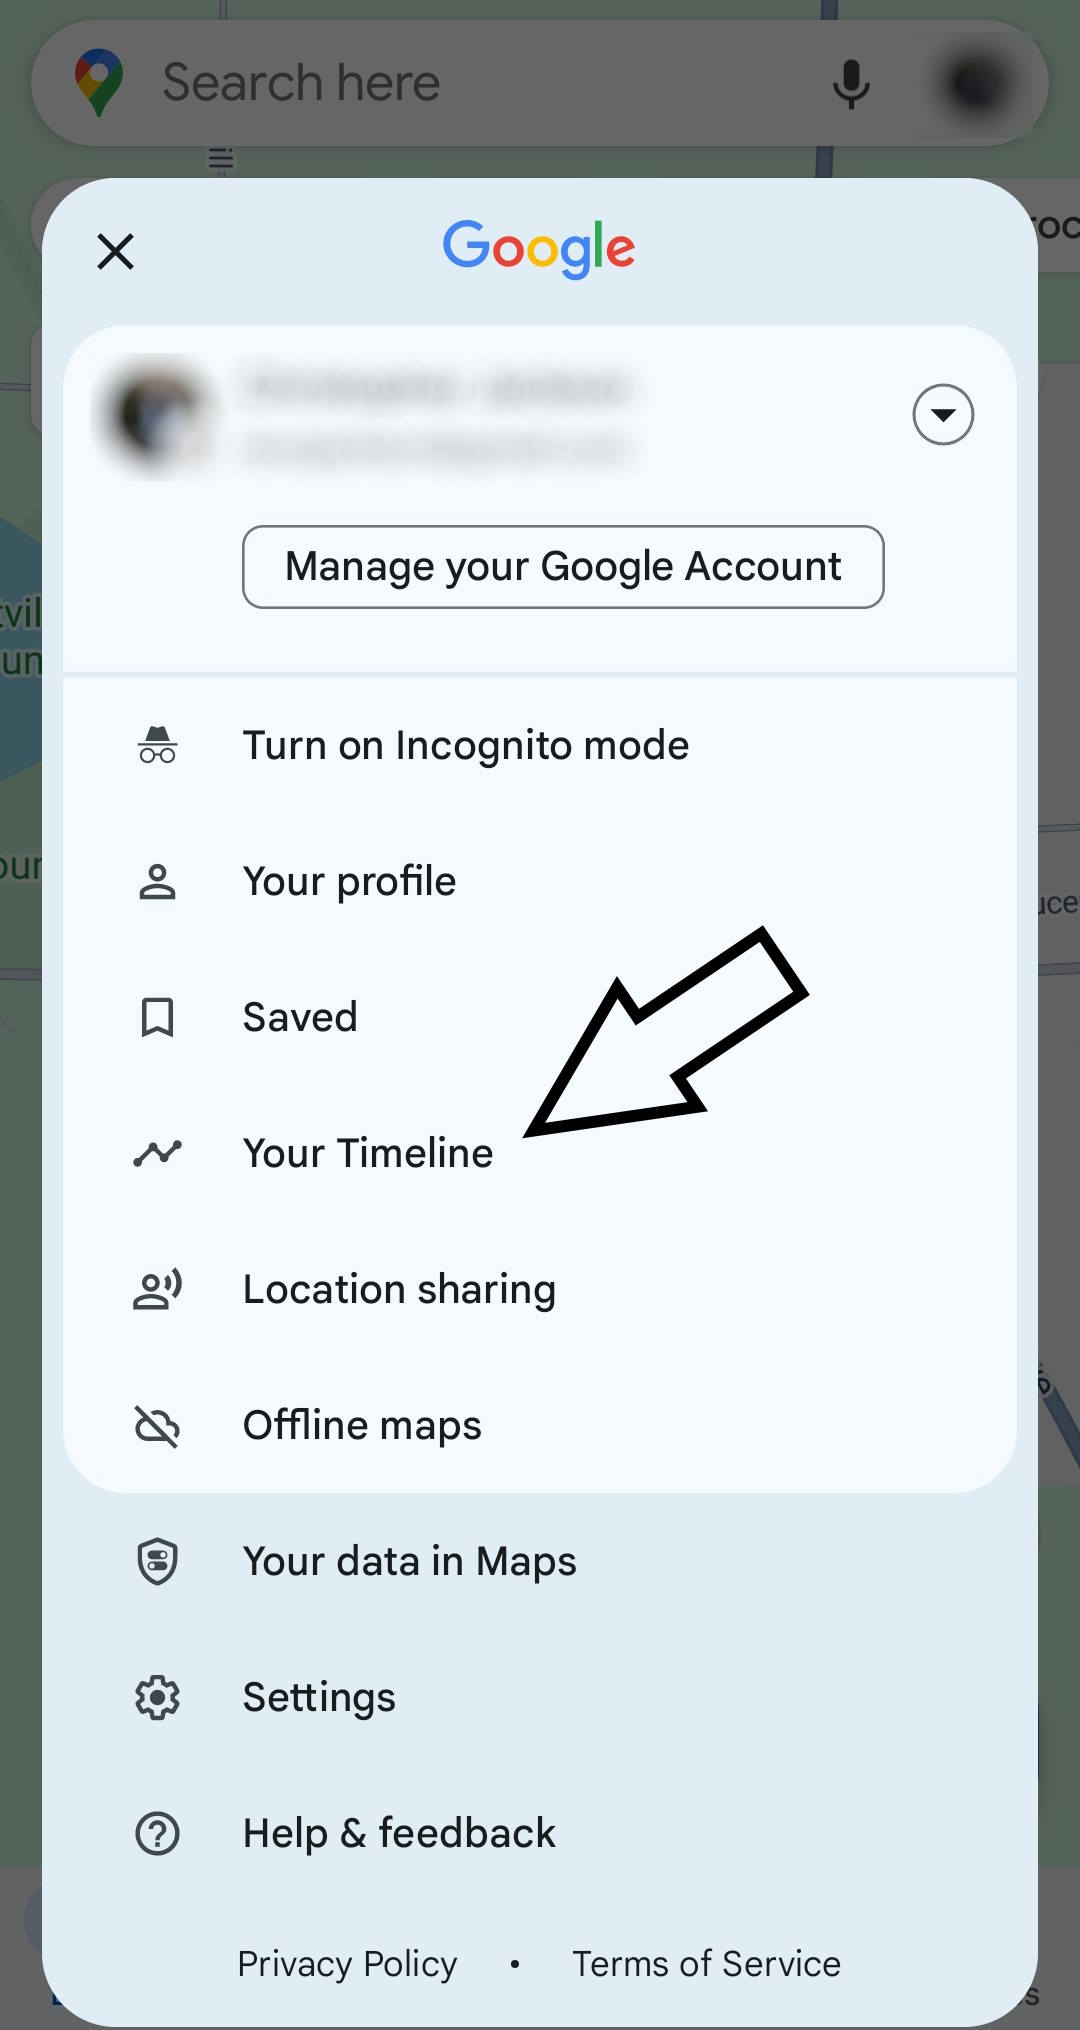 Arrow pointing to "Your Timeline" in Google Maps.